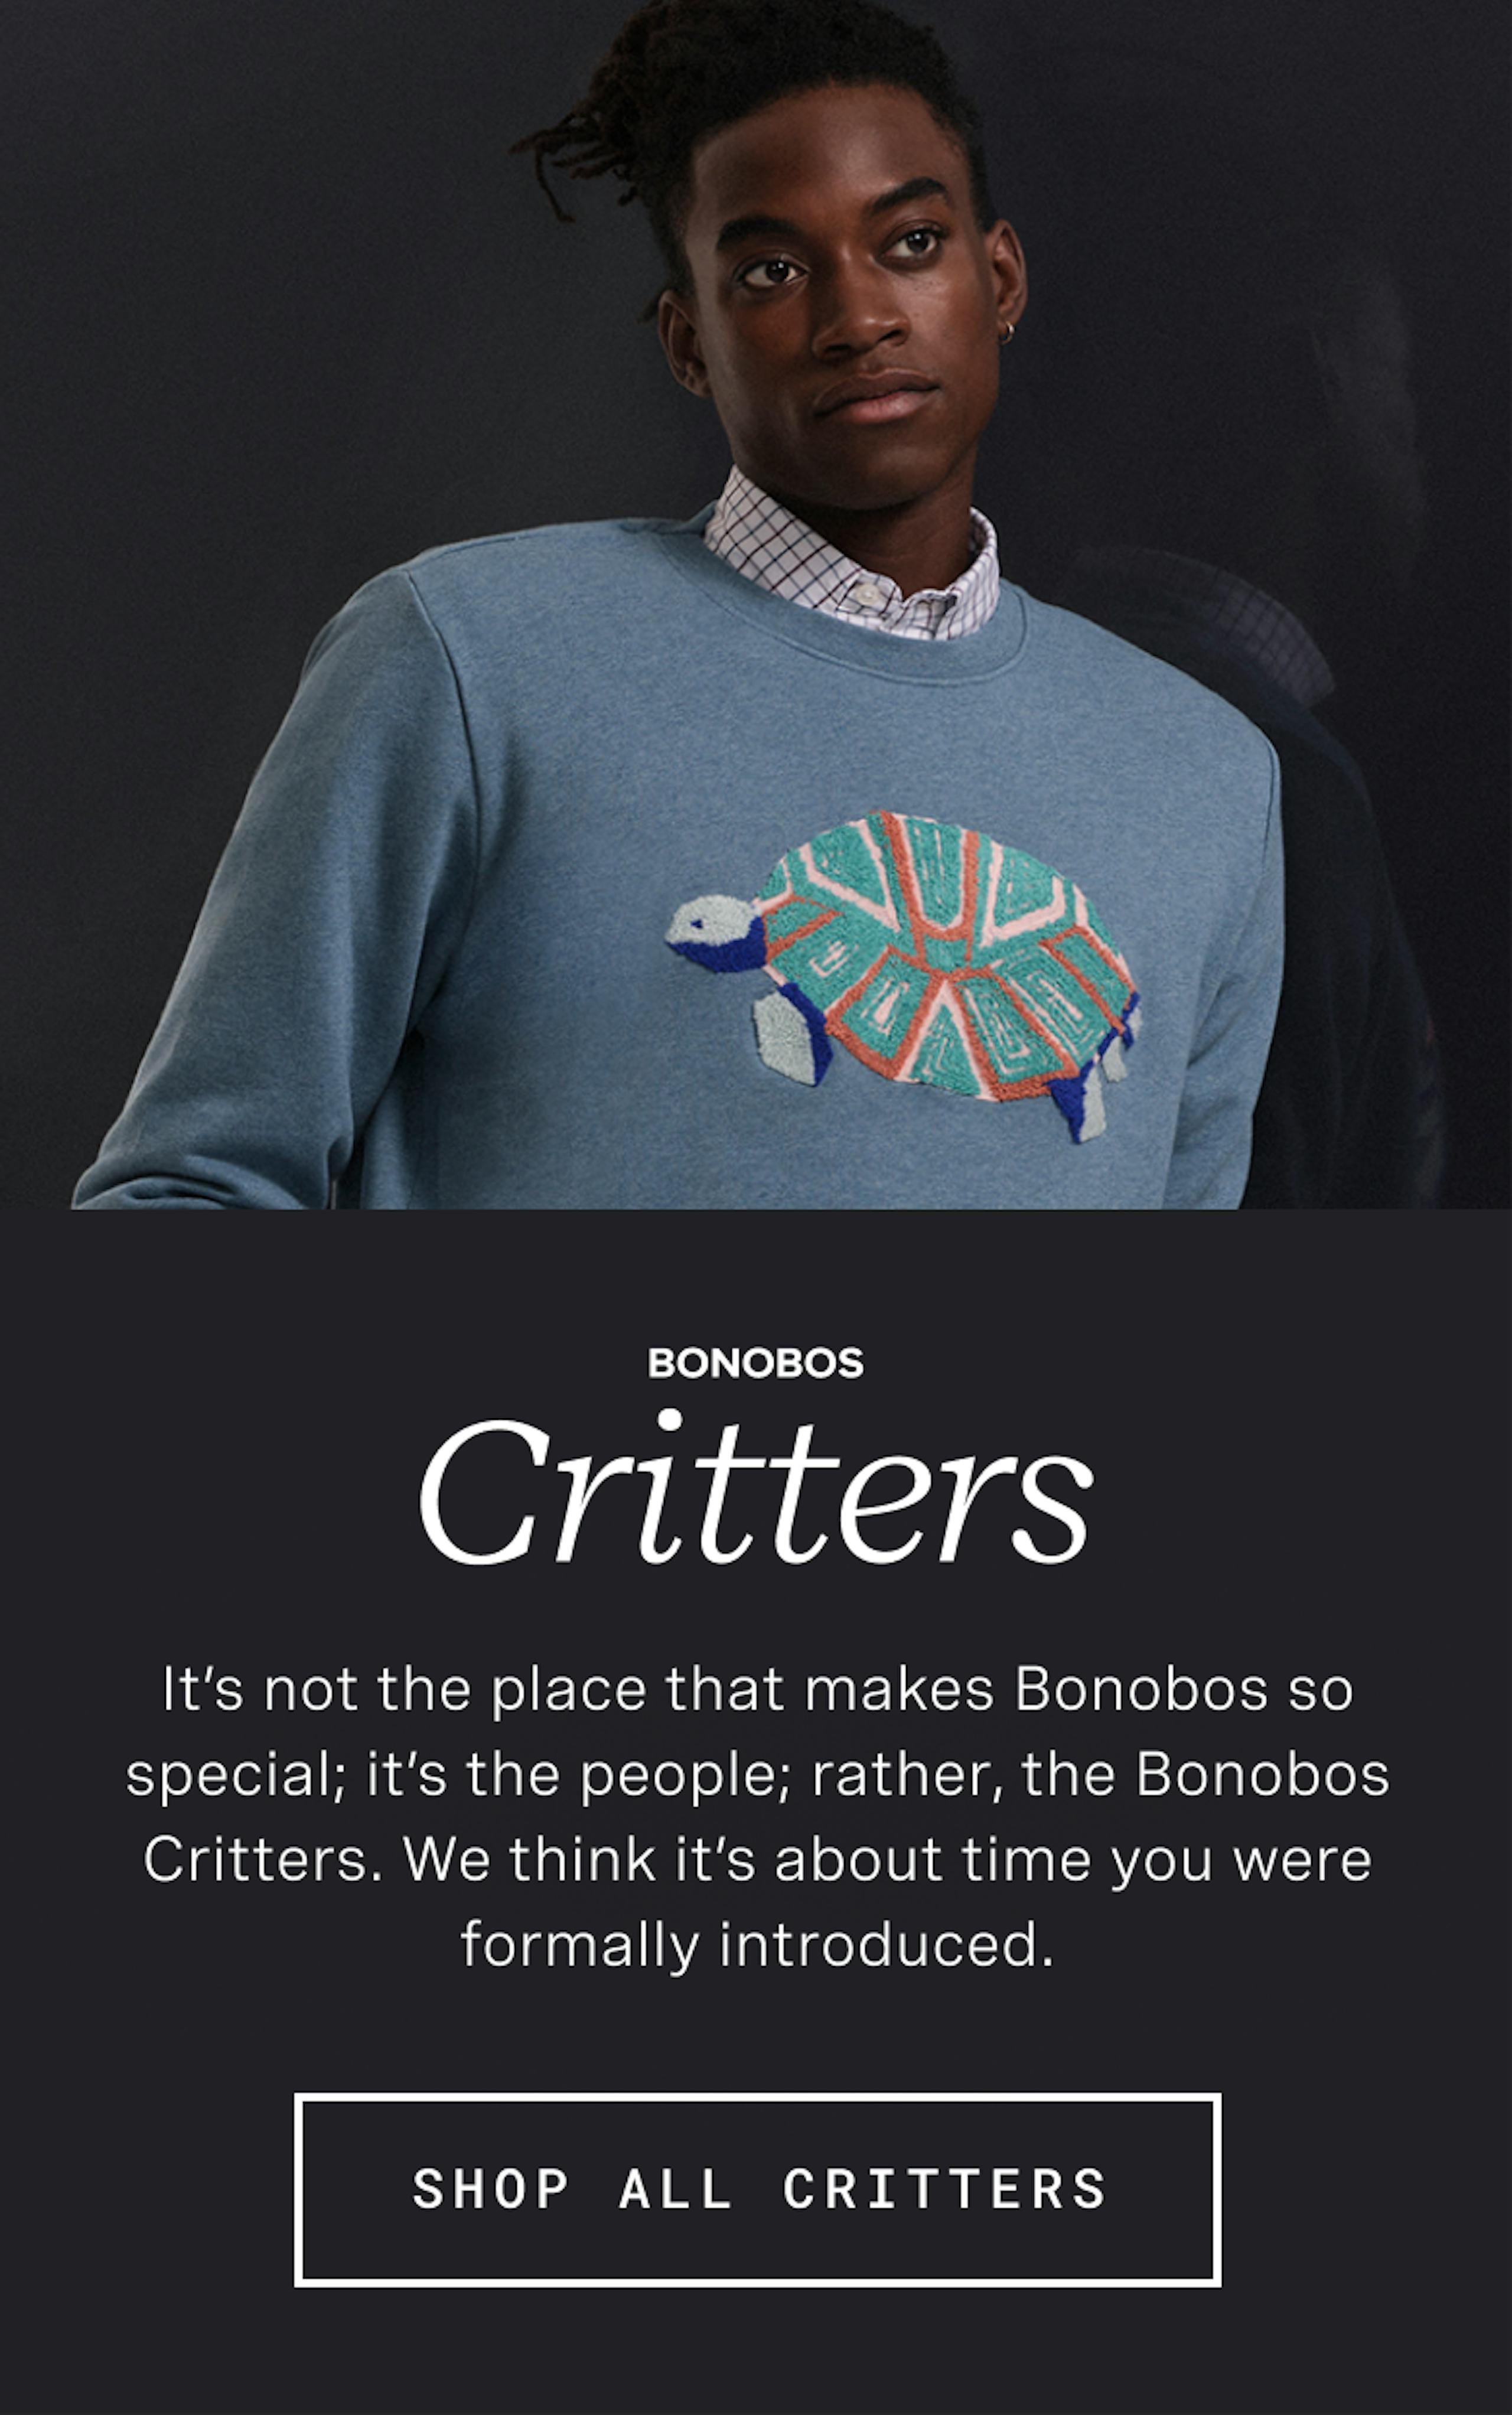 Bonobos Critters | It's not the place that makes Bonobos so special; it's the people; rather, the Bonobos Critters. We think it's about time you were formally introduced.